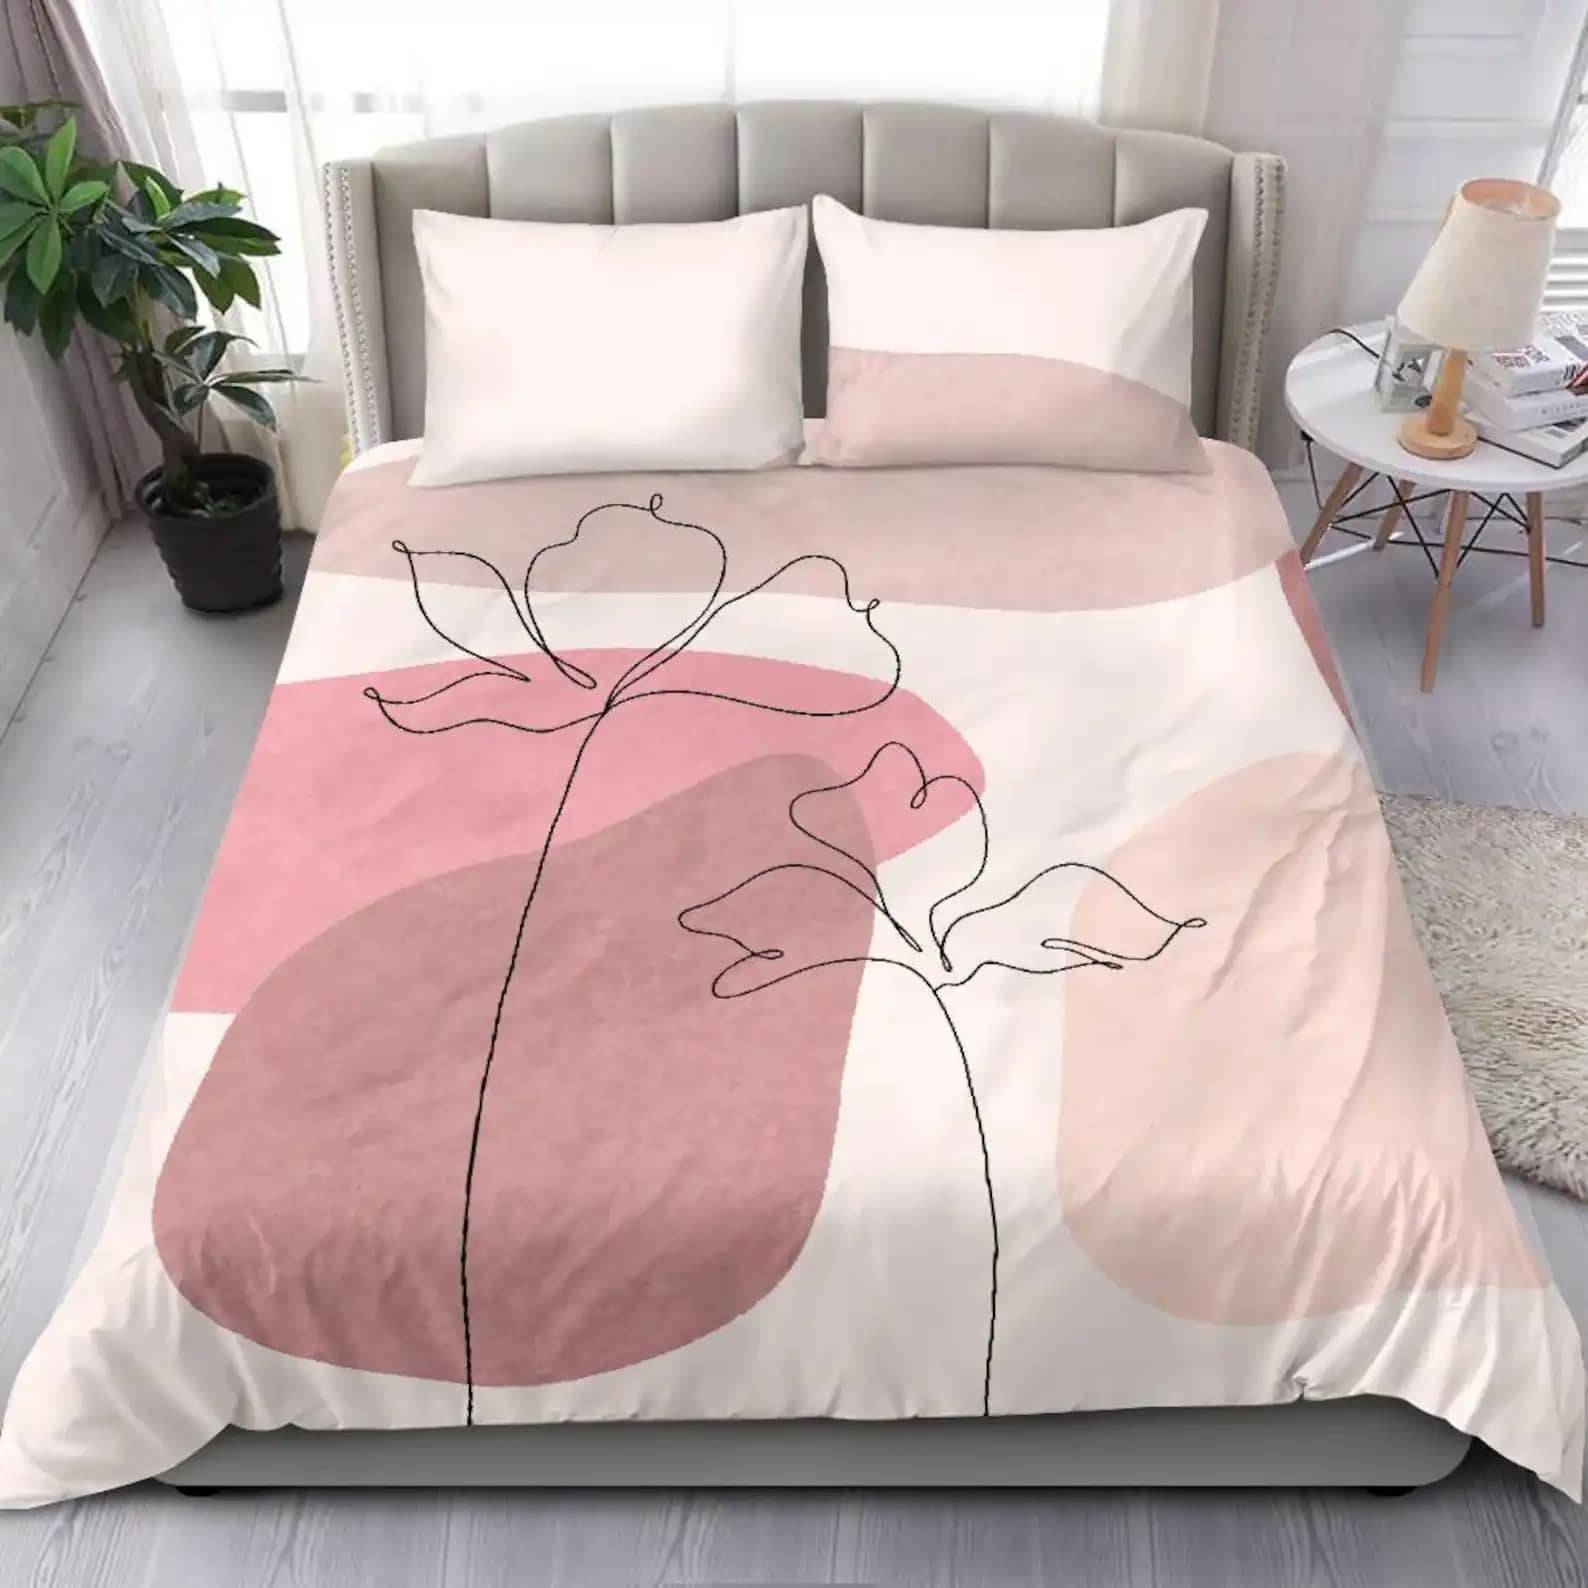 Sweetest Pink Flower Drawing Bedding Cover For Cute Girl Bedroom Decor Quilt Bedding Sets